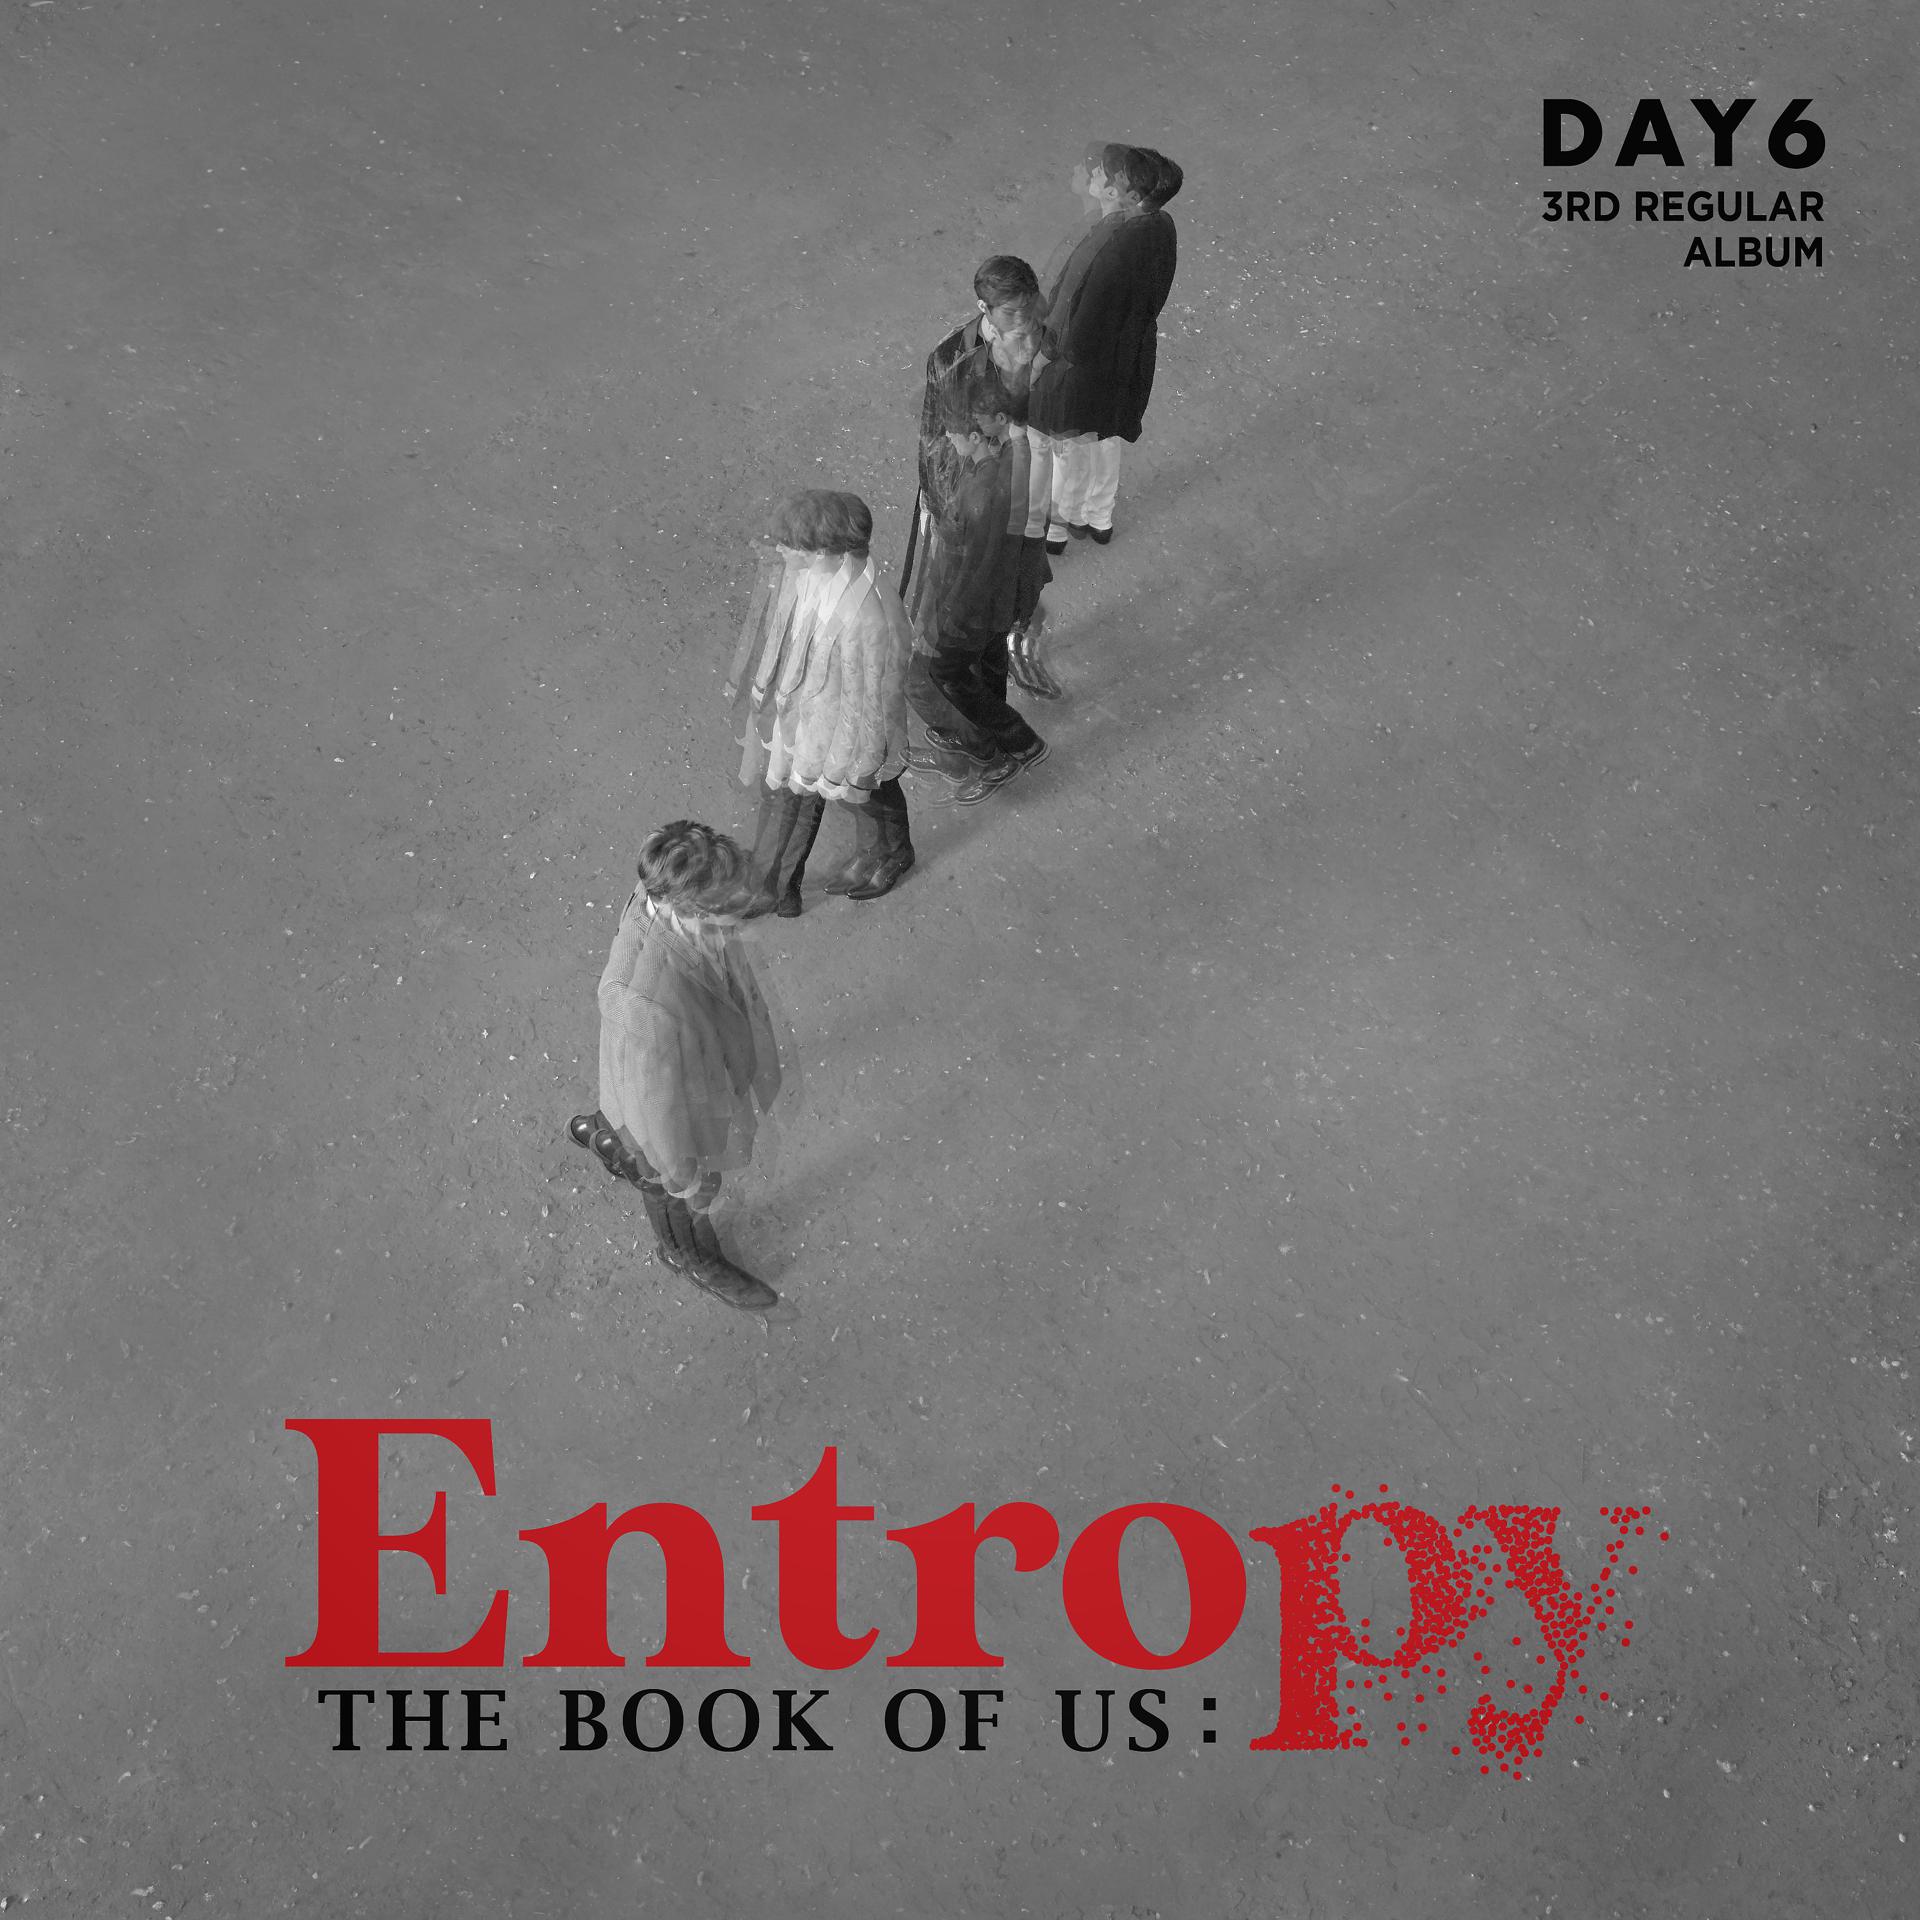 Day6 альбомы. Day6 the book of us Entropy. Альбом day6 Demon. Day6 Entropy album. Cover day6